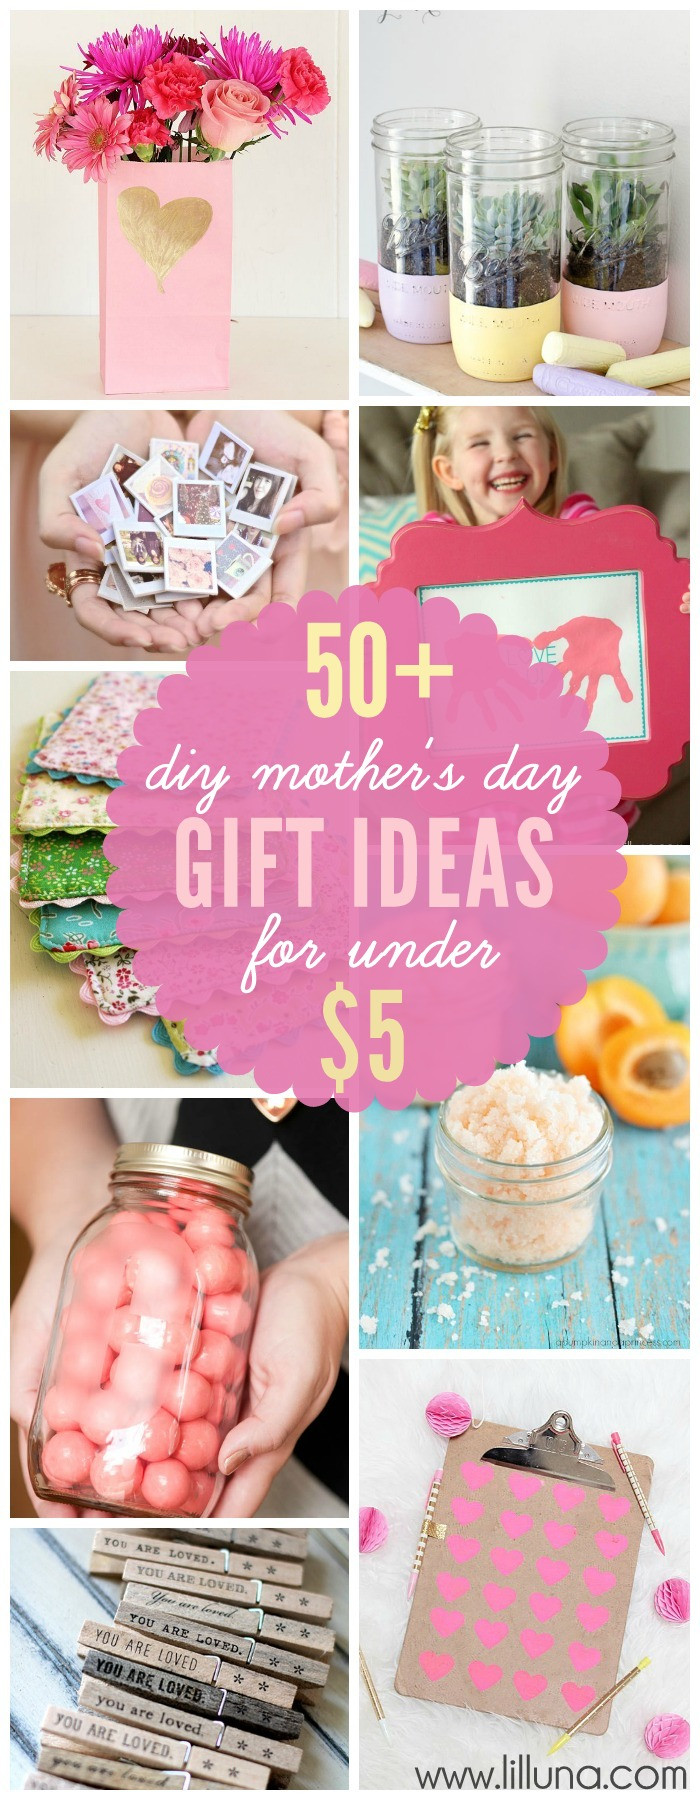 Mothers Day Ideas Gift
 Inexpensive DIY Mother s Day Gift Ideas